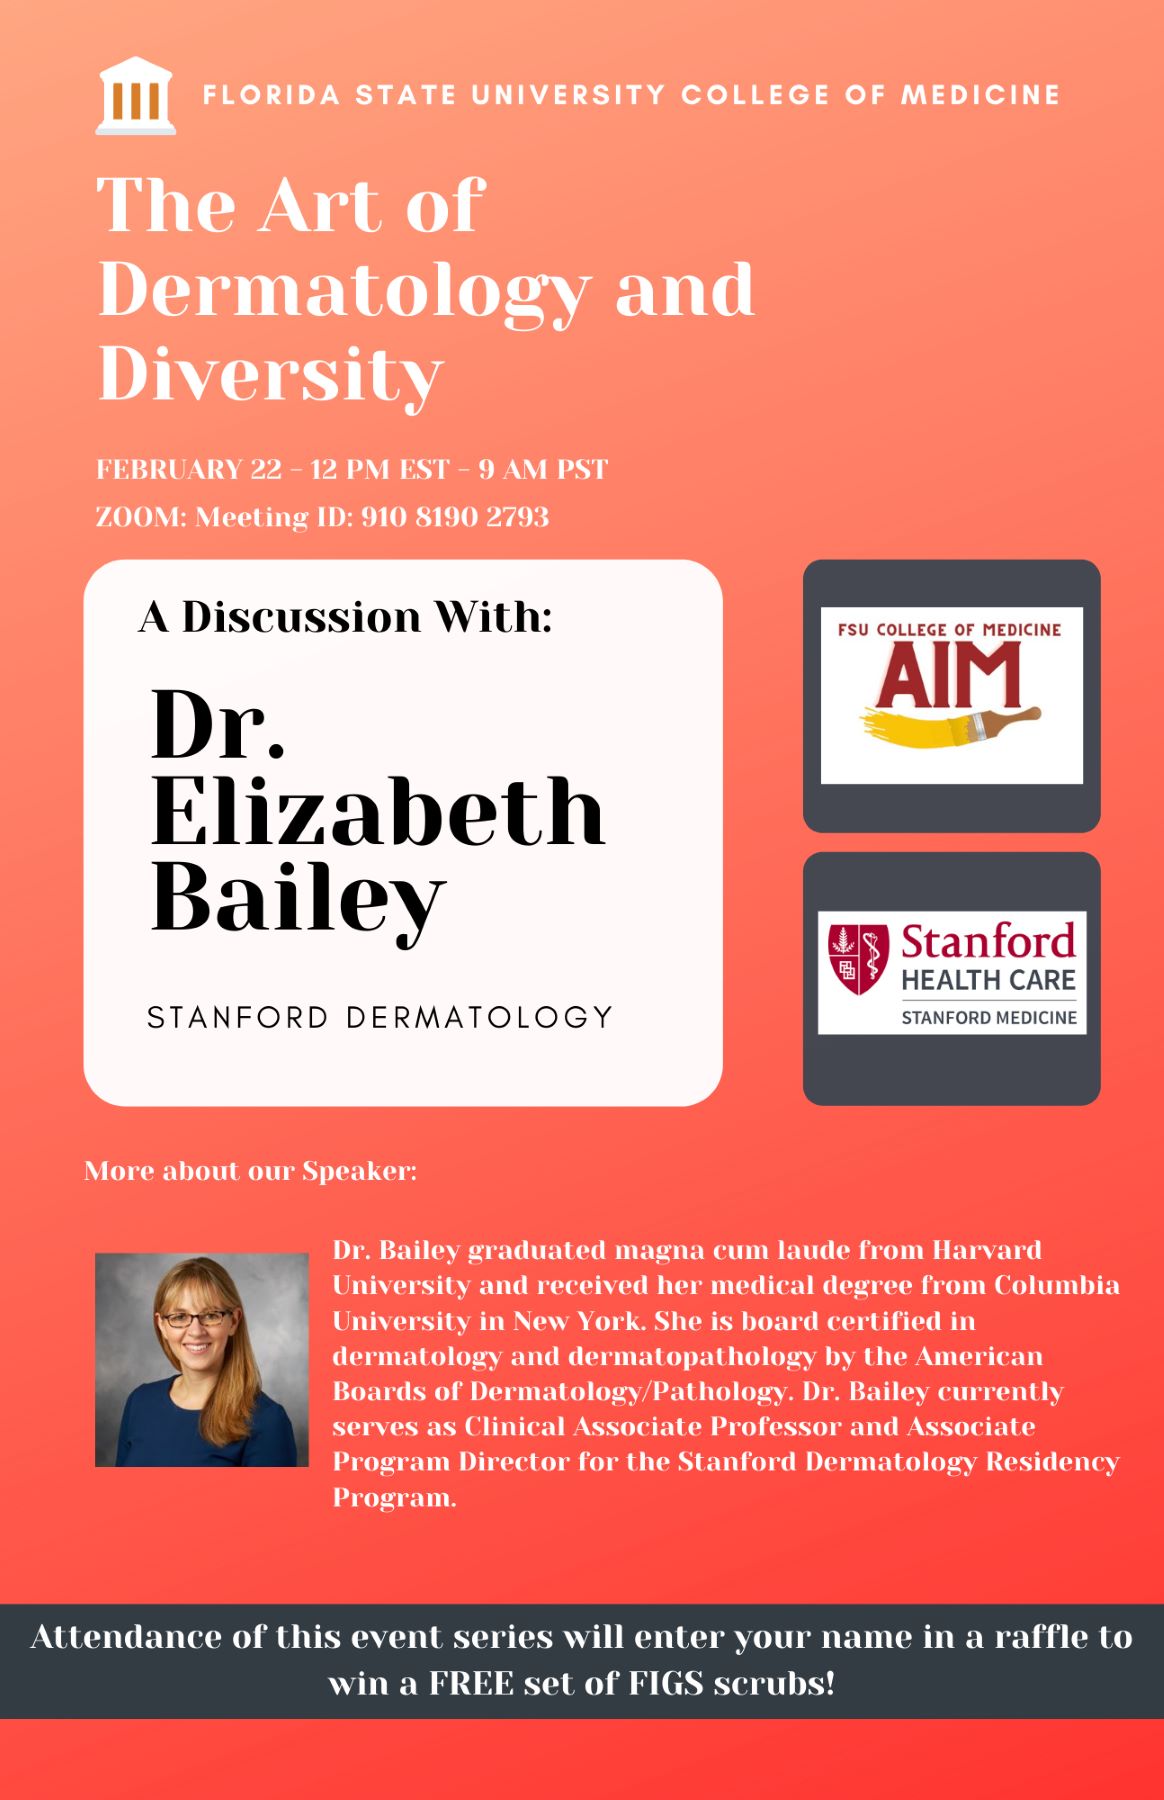 The Art of Dermatology and Diversity